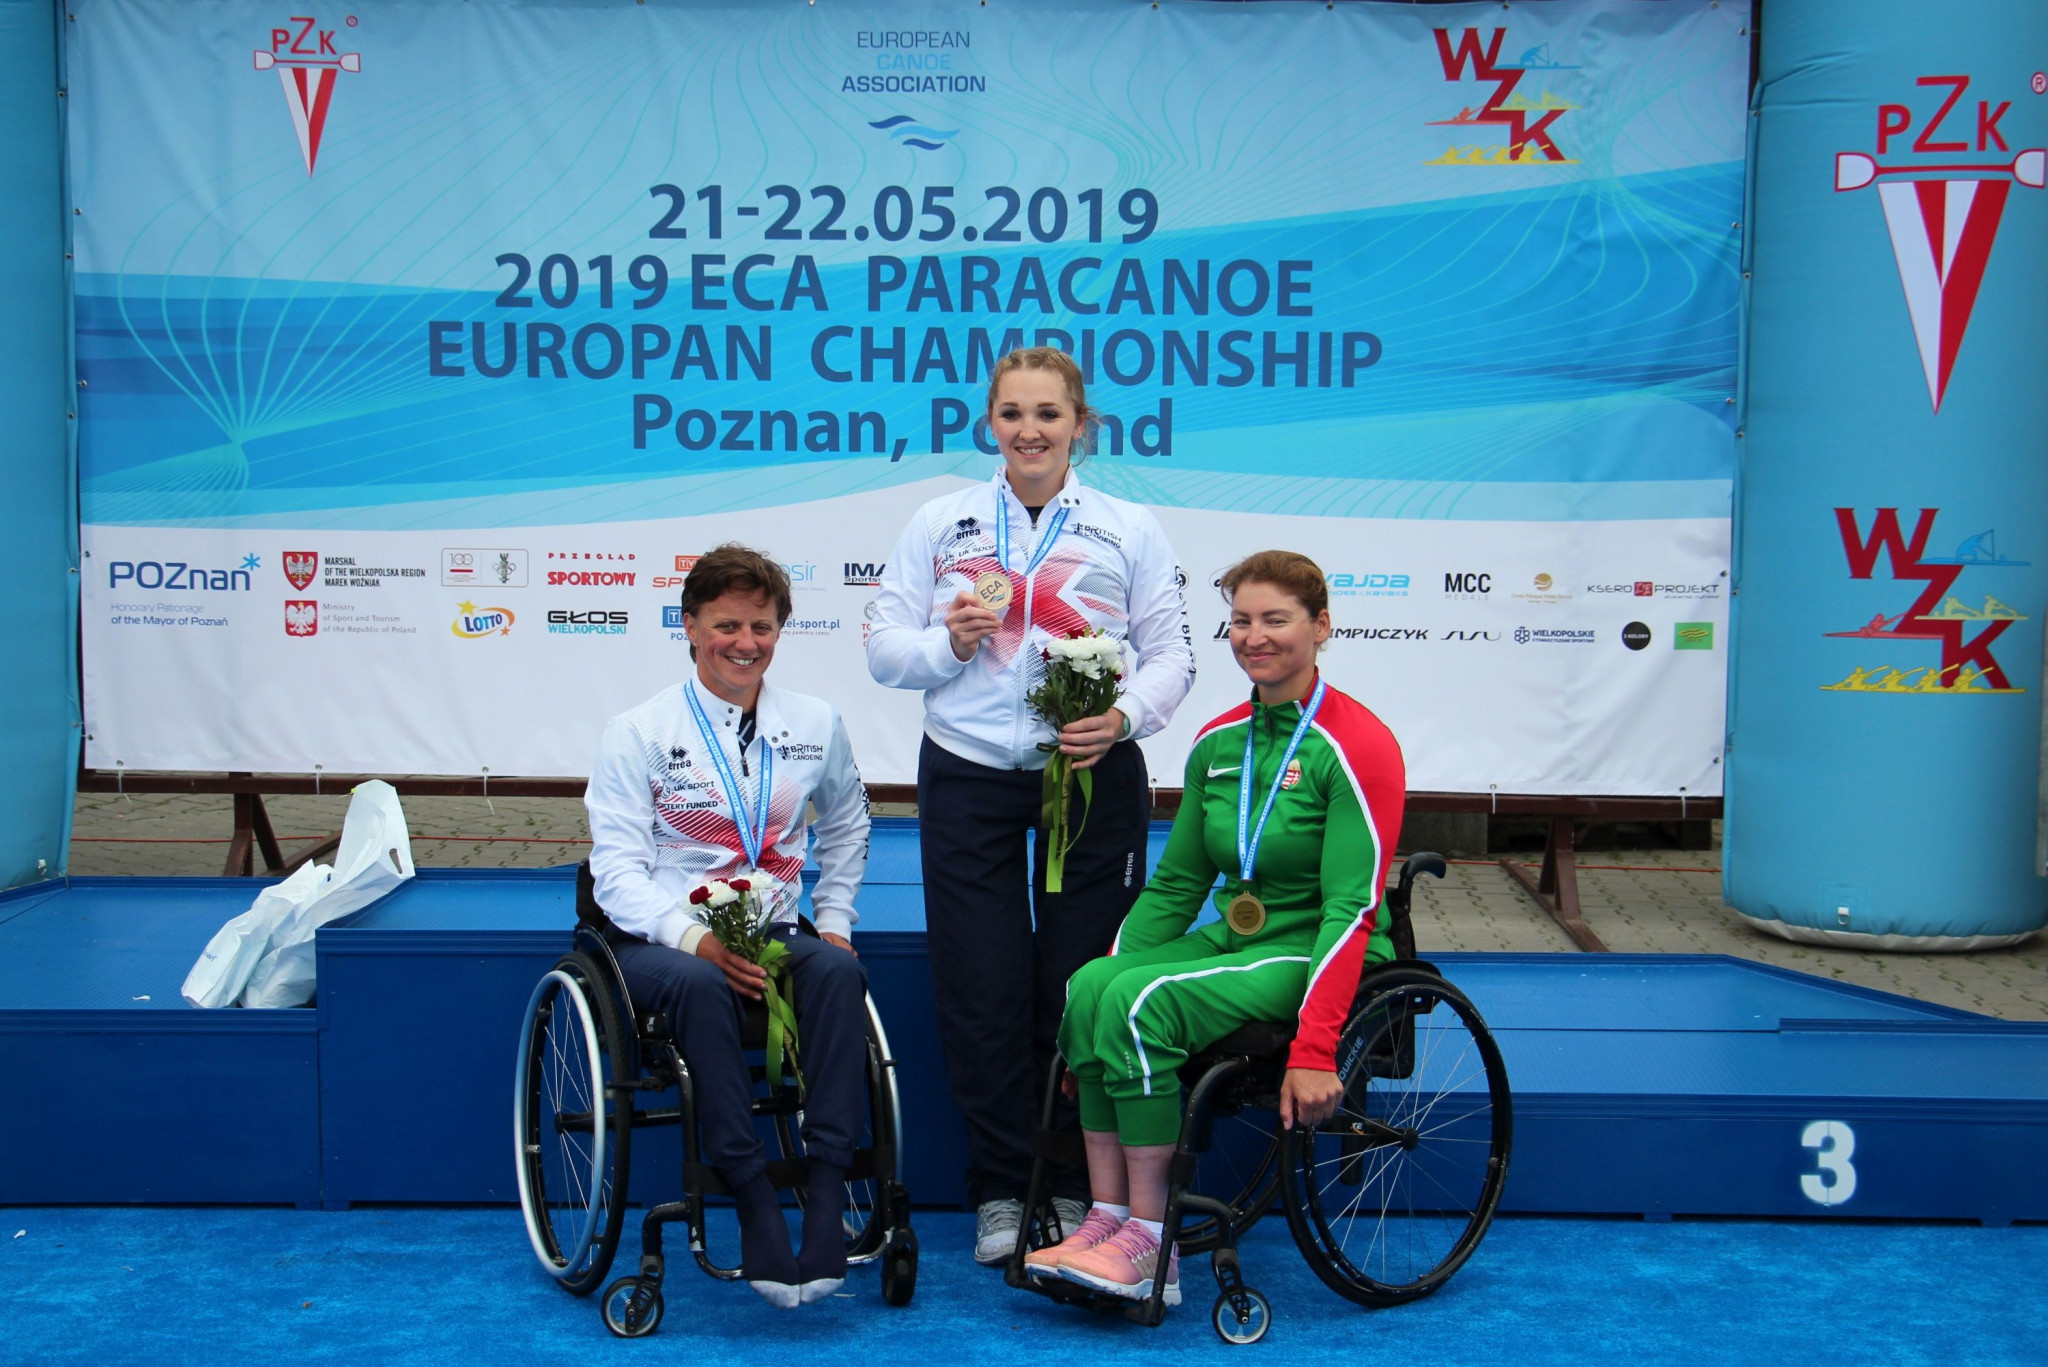 Six medals for Great Britain on final day of Paracanoe European Championships